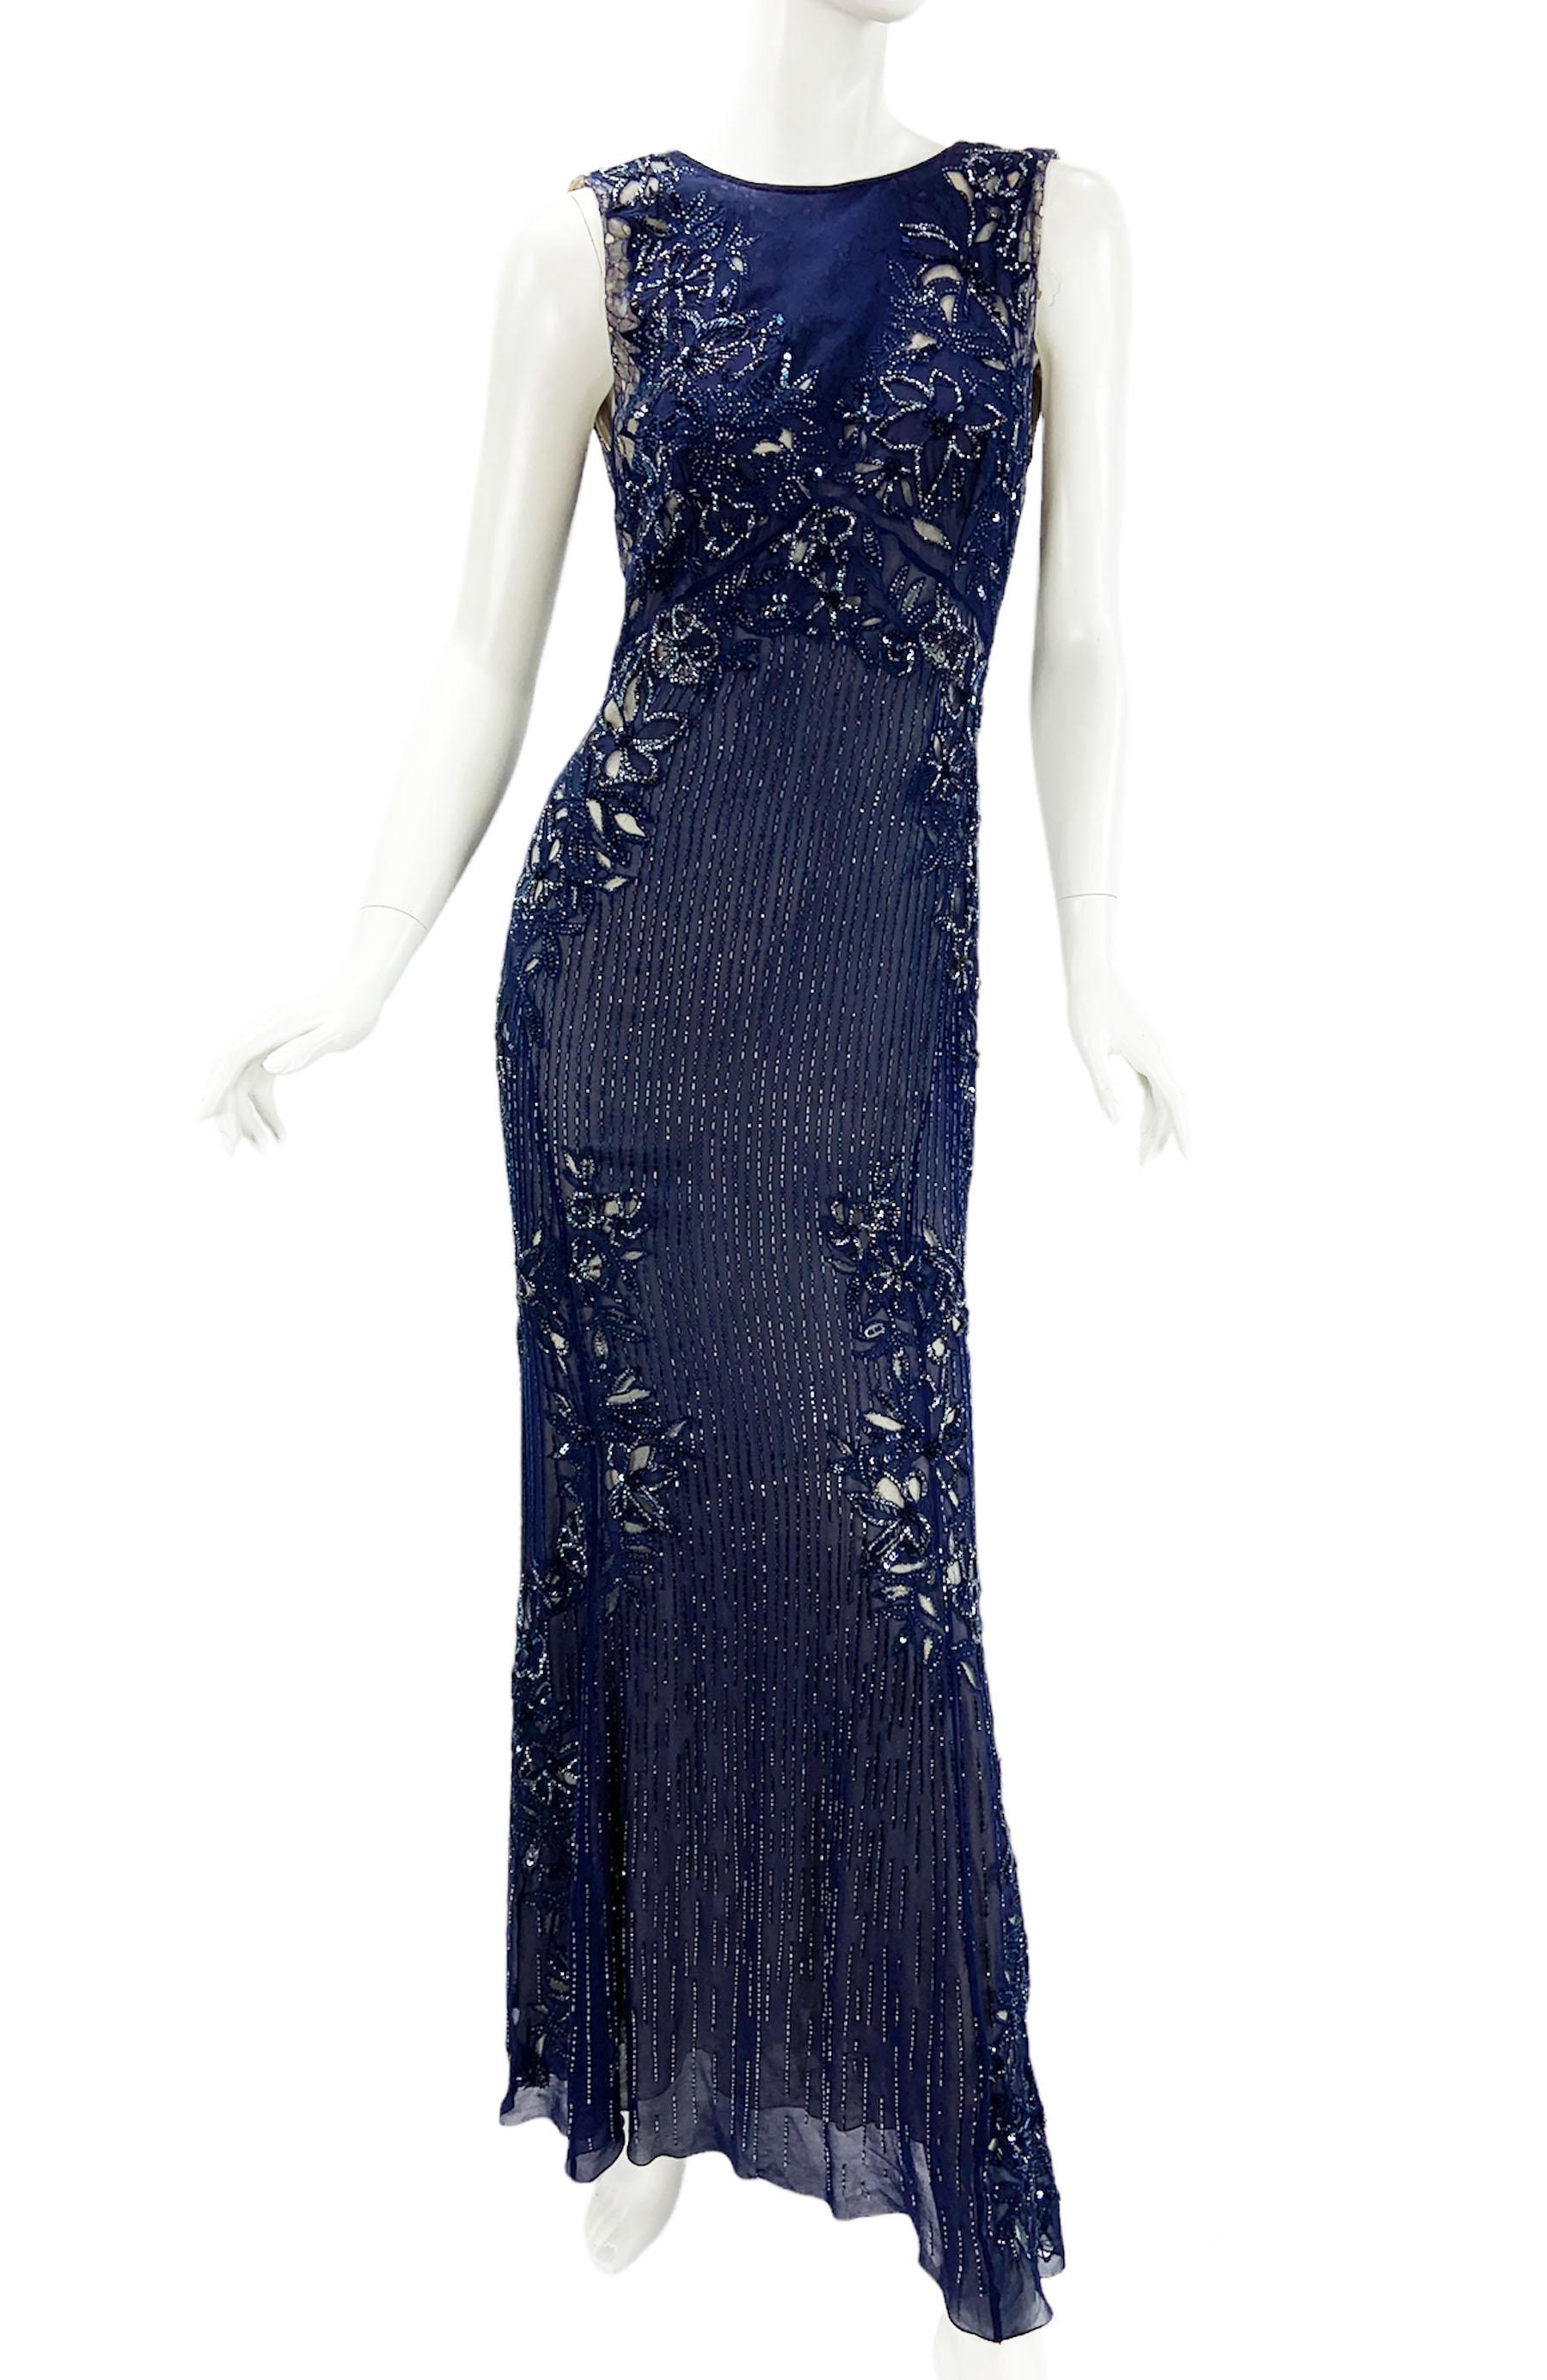 Roberto Cavalli Blue Silk Fully Embellished Dress Gown
Italian size 42 - US 6
Blue Silk Over the Tulle, Cut-Out Flower Details, Fully Embellished with Beads and Sequins, Beige Color Lining, Open Back.
Measurements: Length - 57 inches ( front) 60